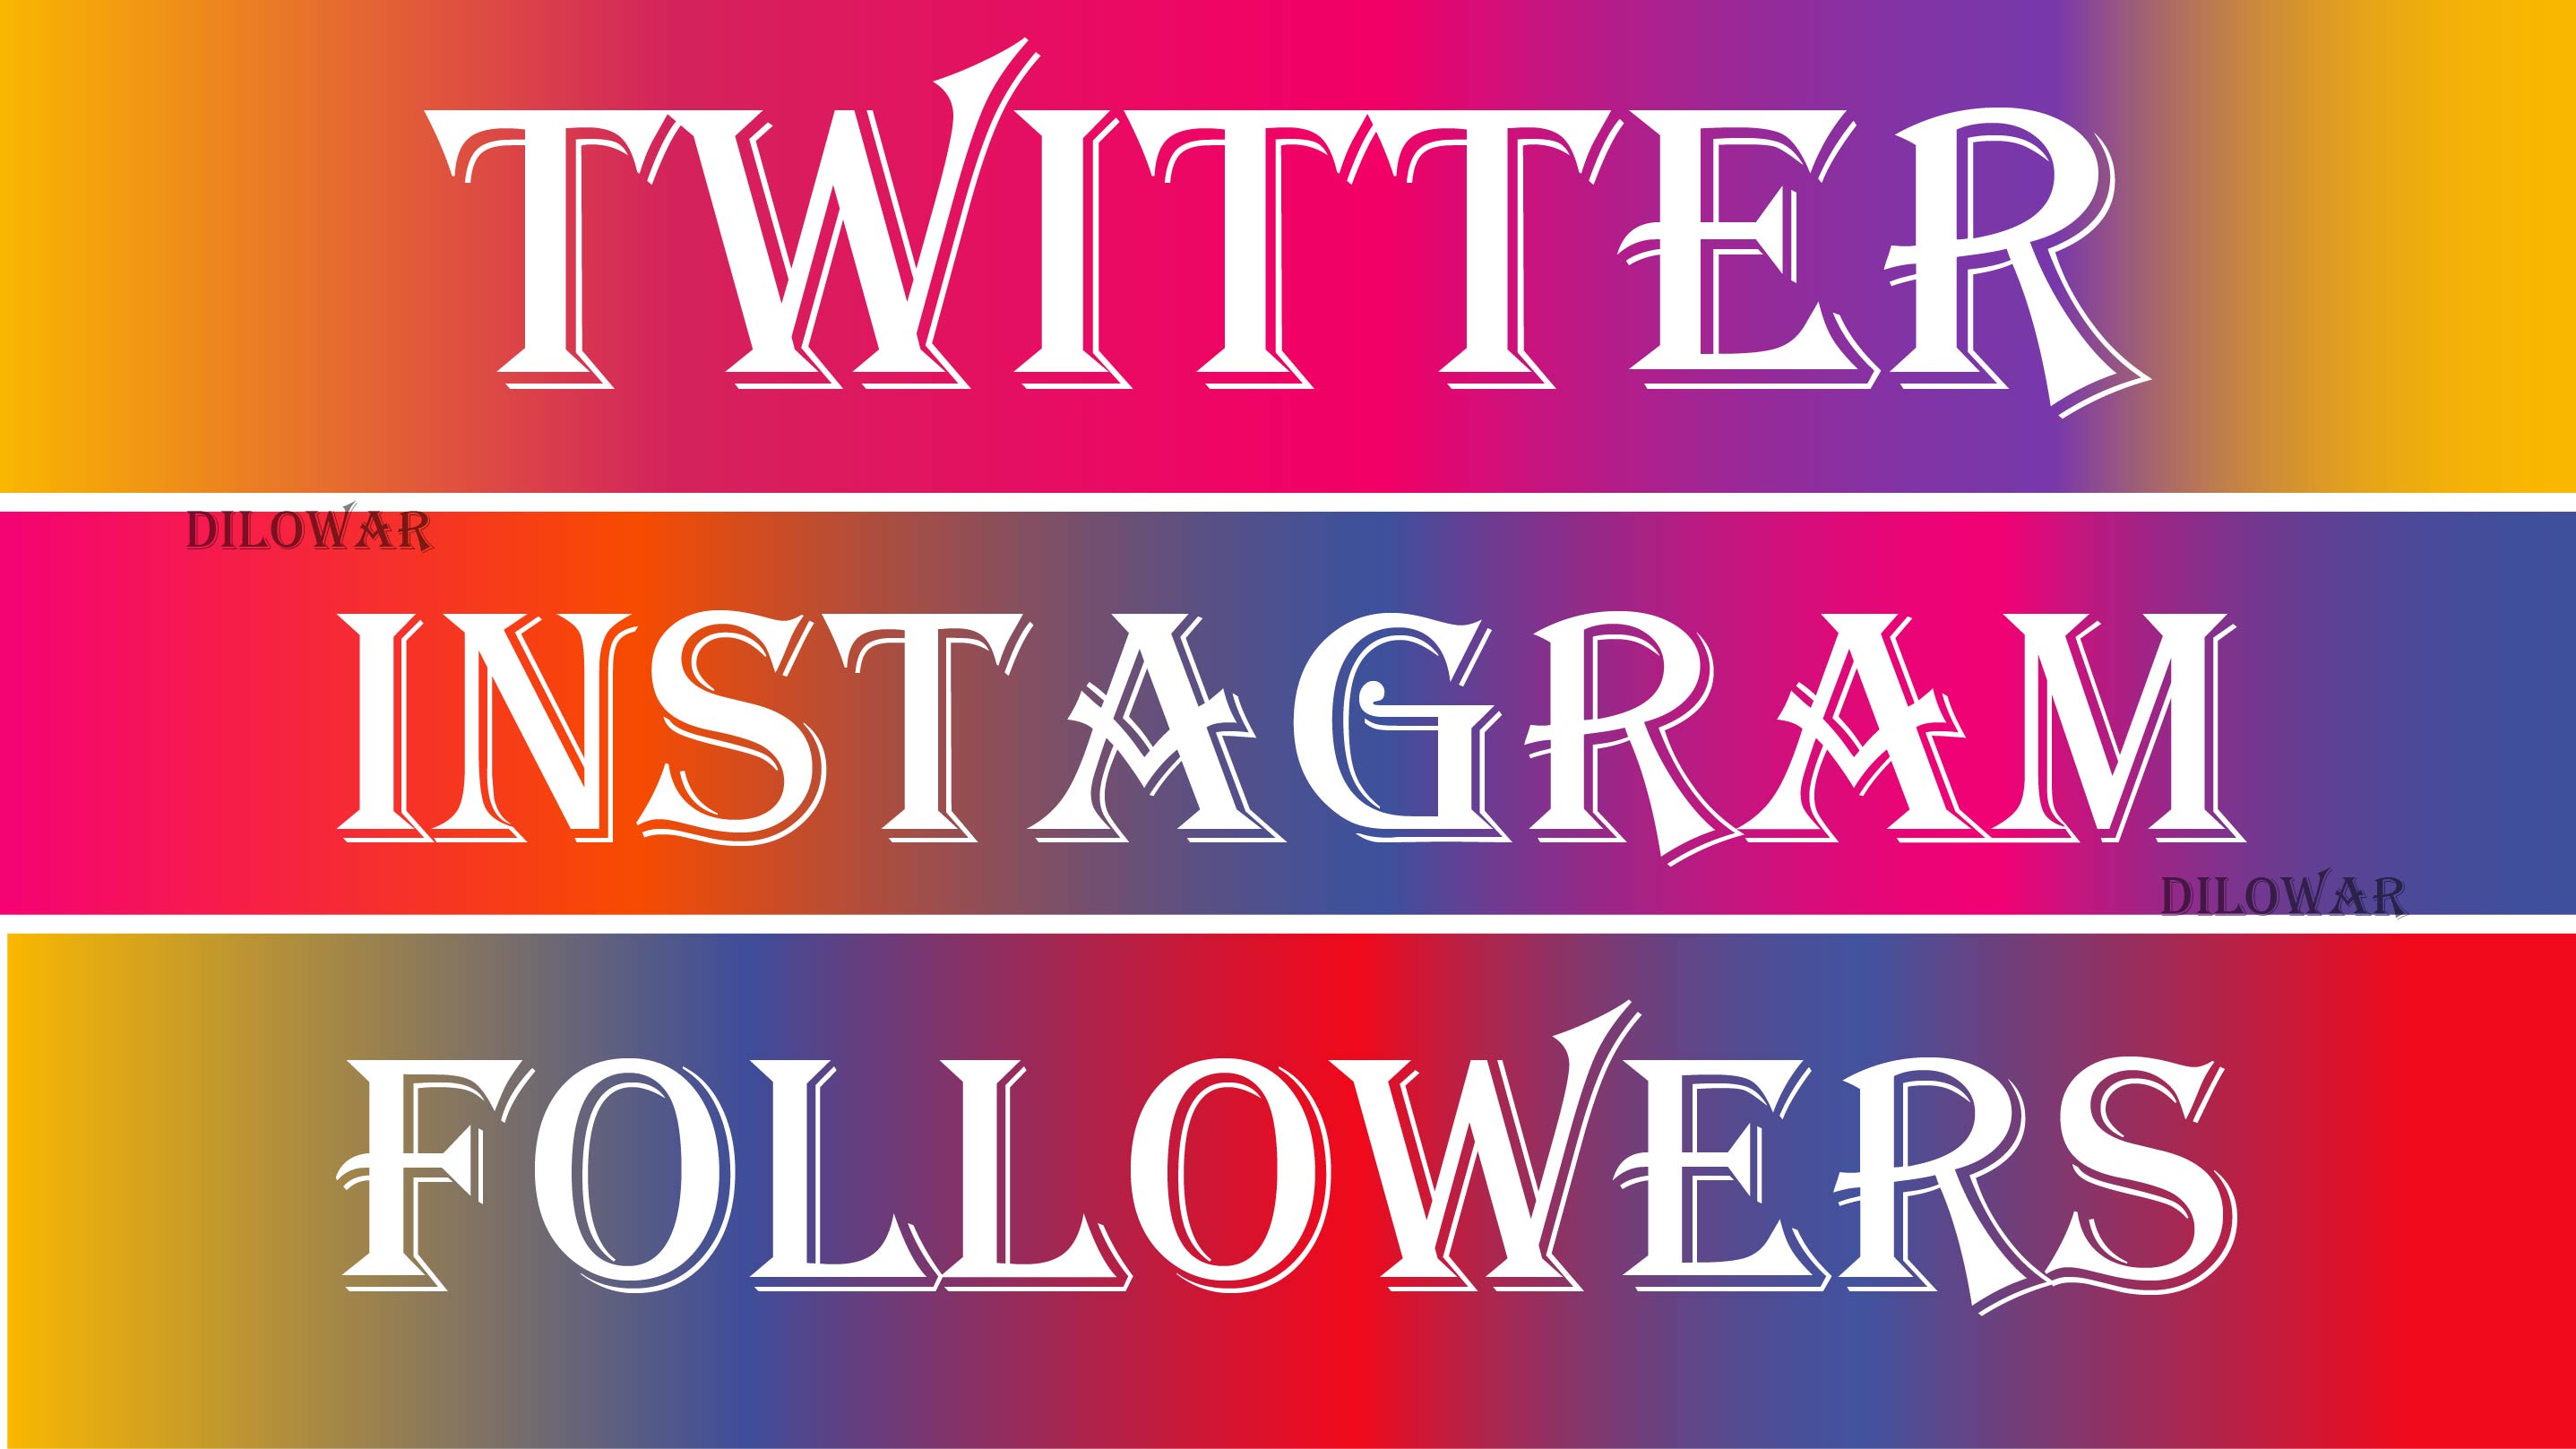 Get Instagram Followers or Twitter Followers, Non Drop and Real Active User Guaranteed (Refill if Drop)